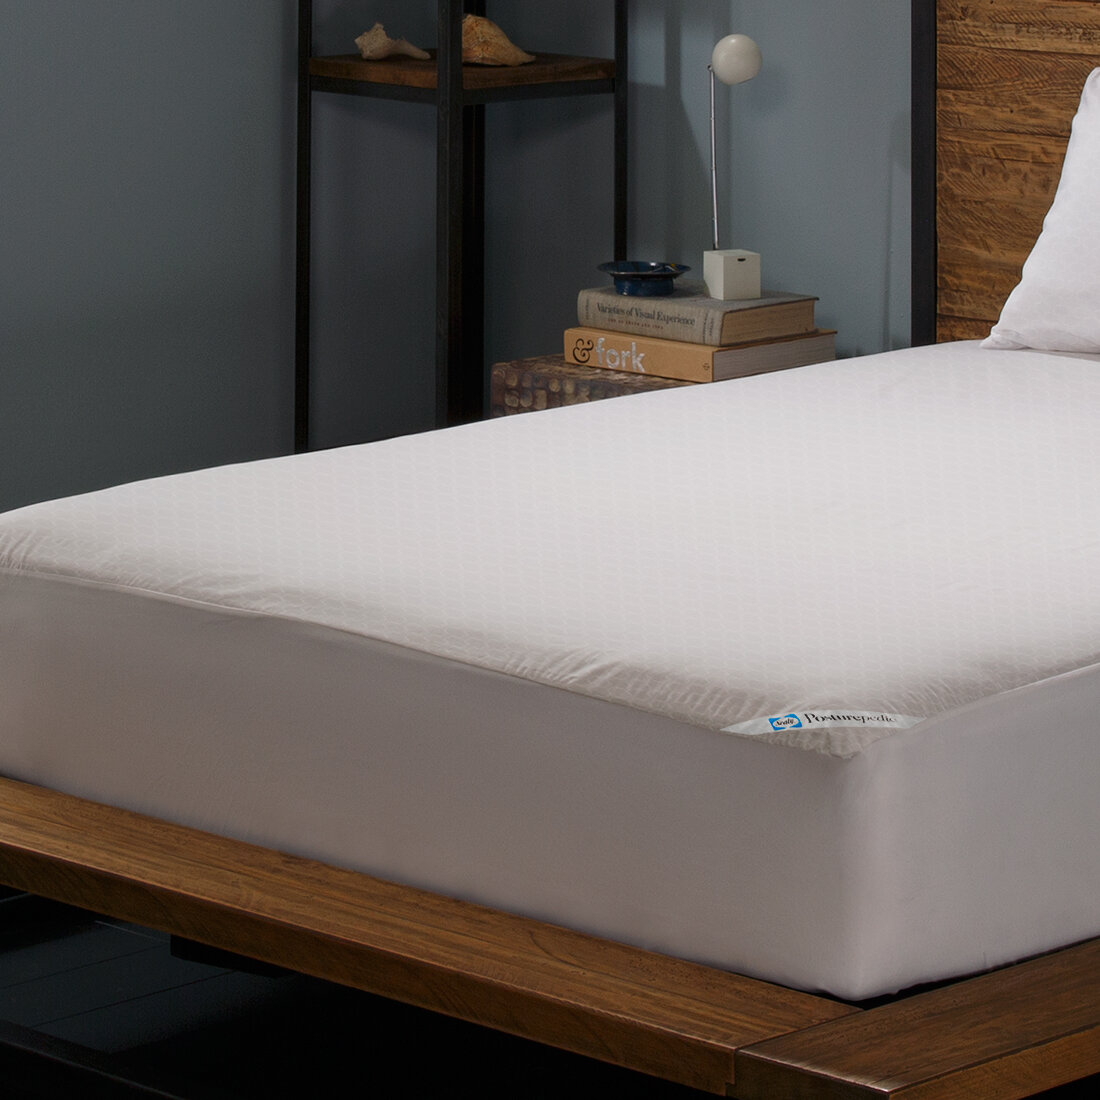 Sealy Cool Comfort Fitted Mattress Protector, Twin - White